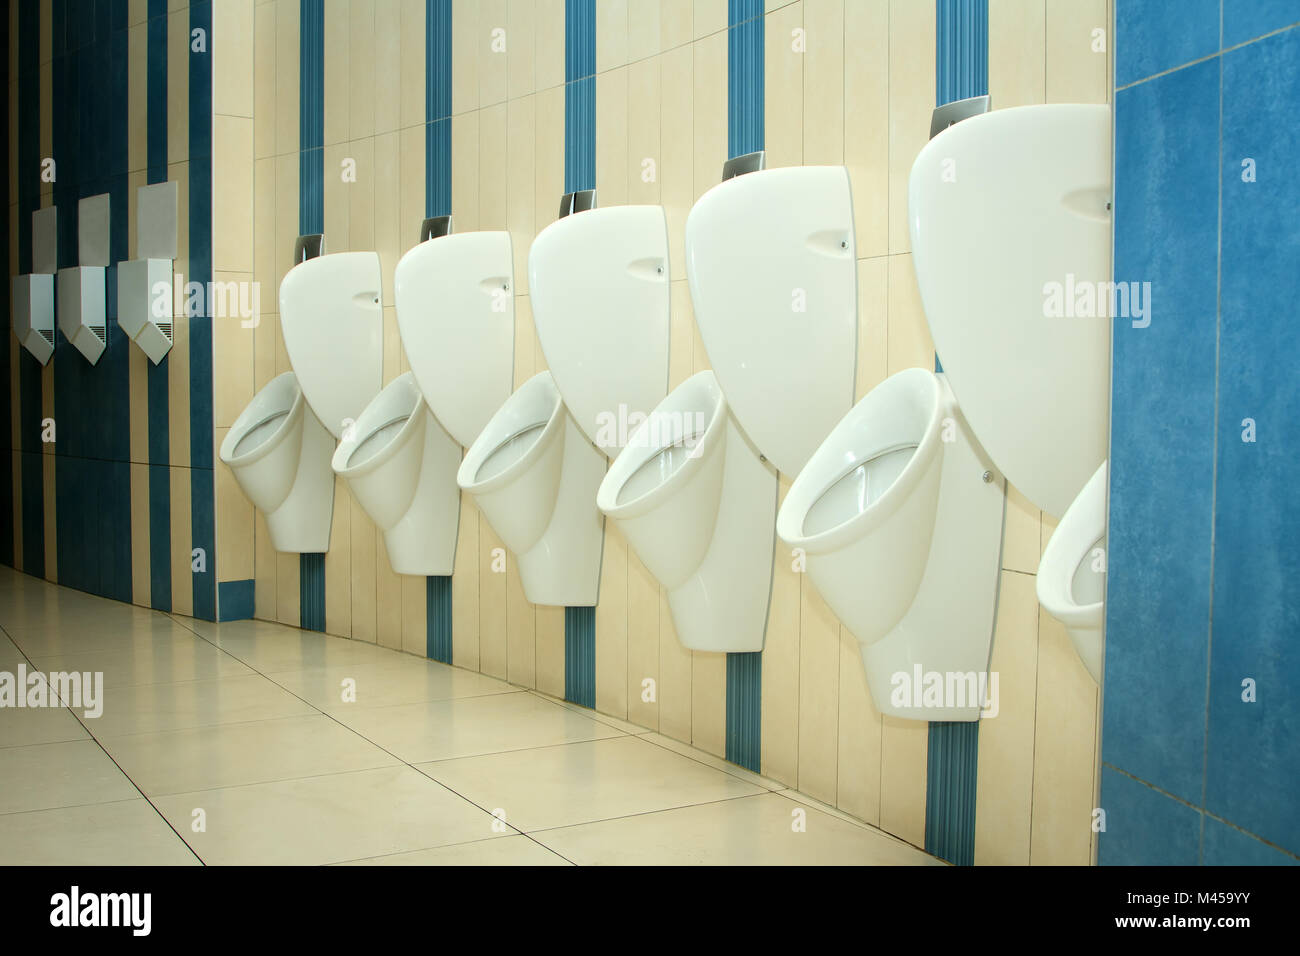 modern restroom interior with urinal row Stock Photo